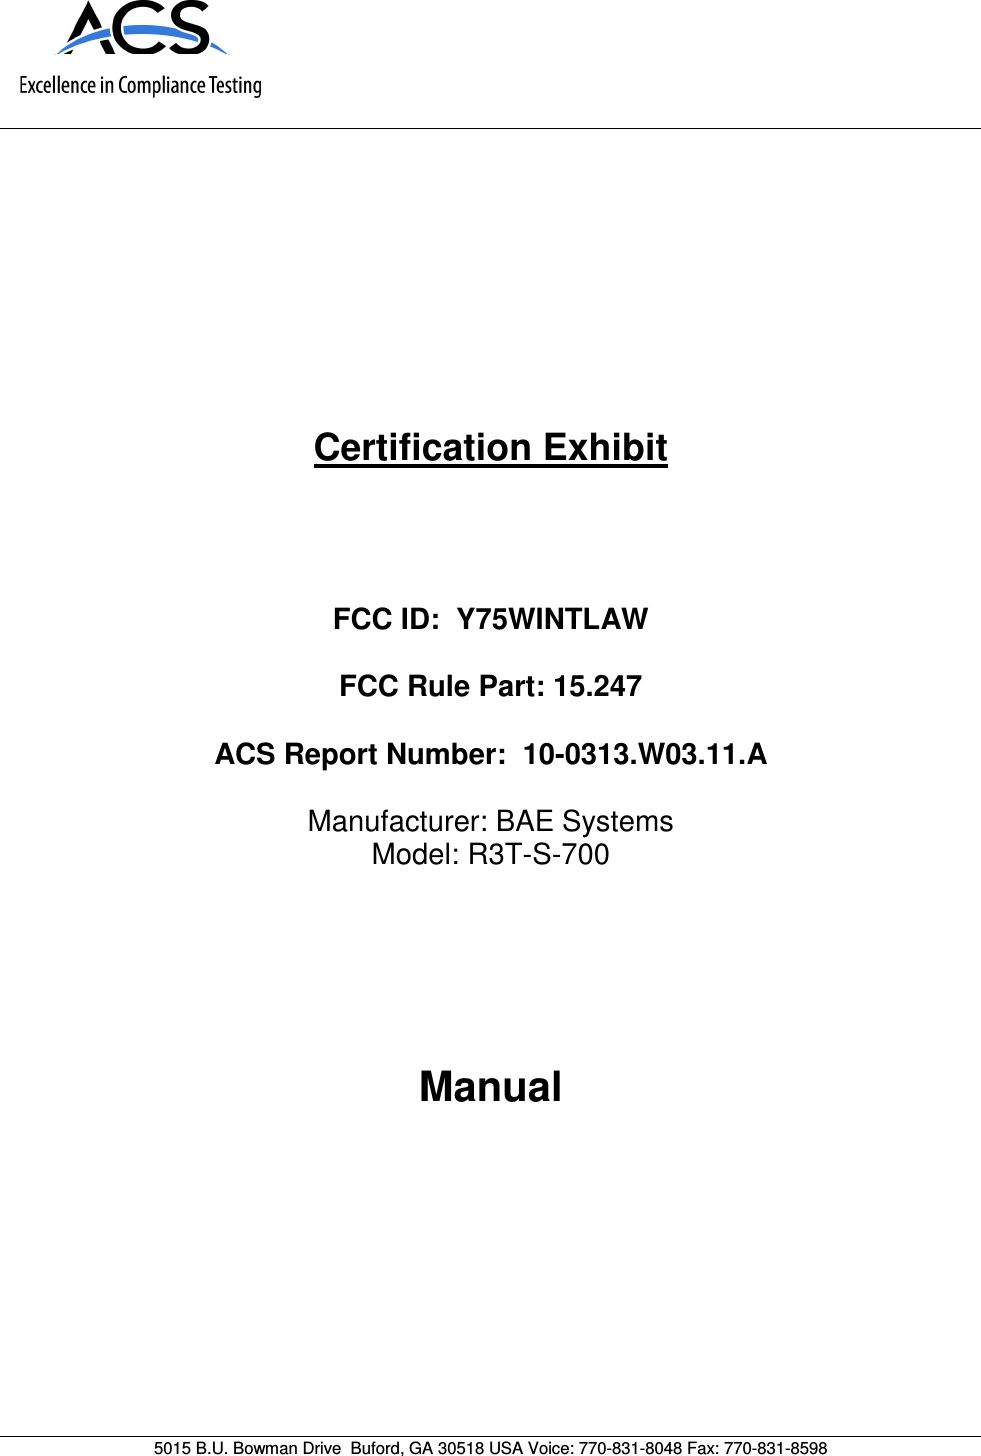      5015 B.U. Bowman Drive  Buford, GA 30518 USA Voice: 770-831-8048 Fax: 770-831-8598   Certification Exhibit     FCC ID:  Y75WINTLAW  FCC Rule Part: 15.247  ACS Report Number:  10-0313.W03.11.A   Manufacturer: BAE Systems Model: R3T-S-700     Manual  